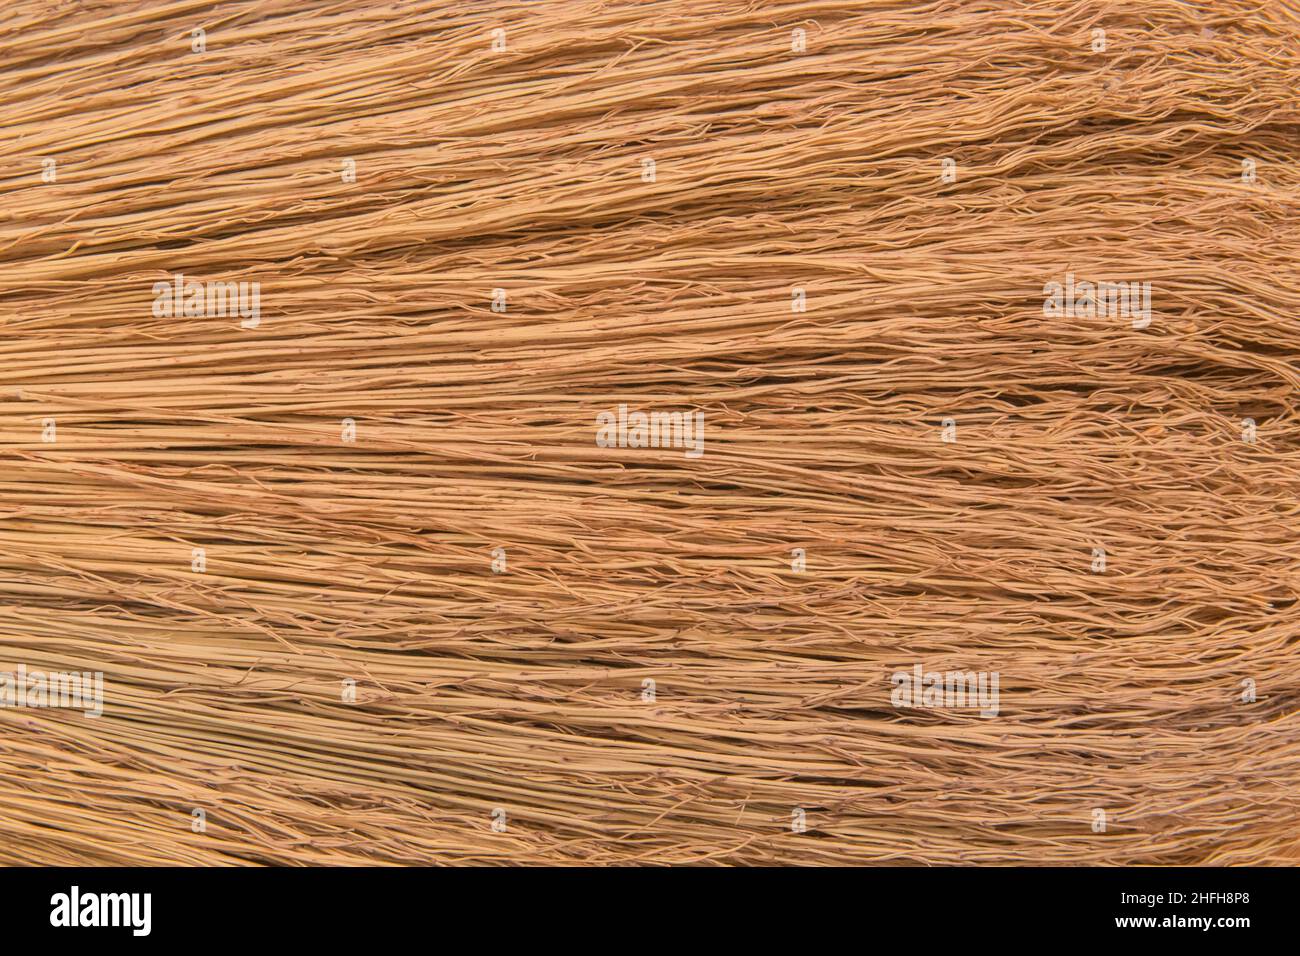 Millet broom natural texture straw dry agriculture plant pattern abstract background surface. Stock Photo